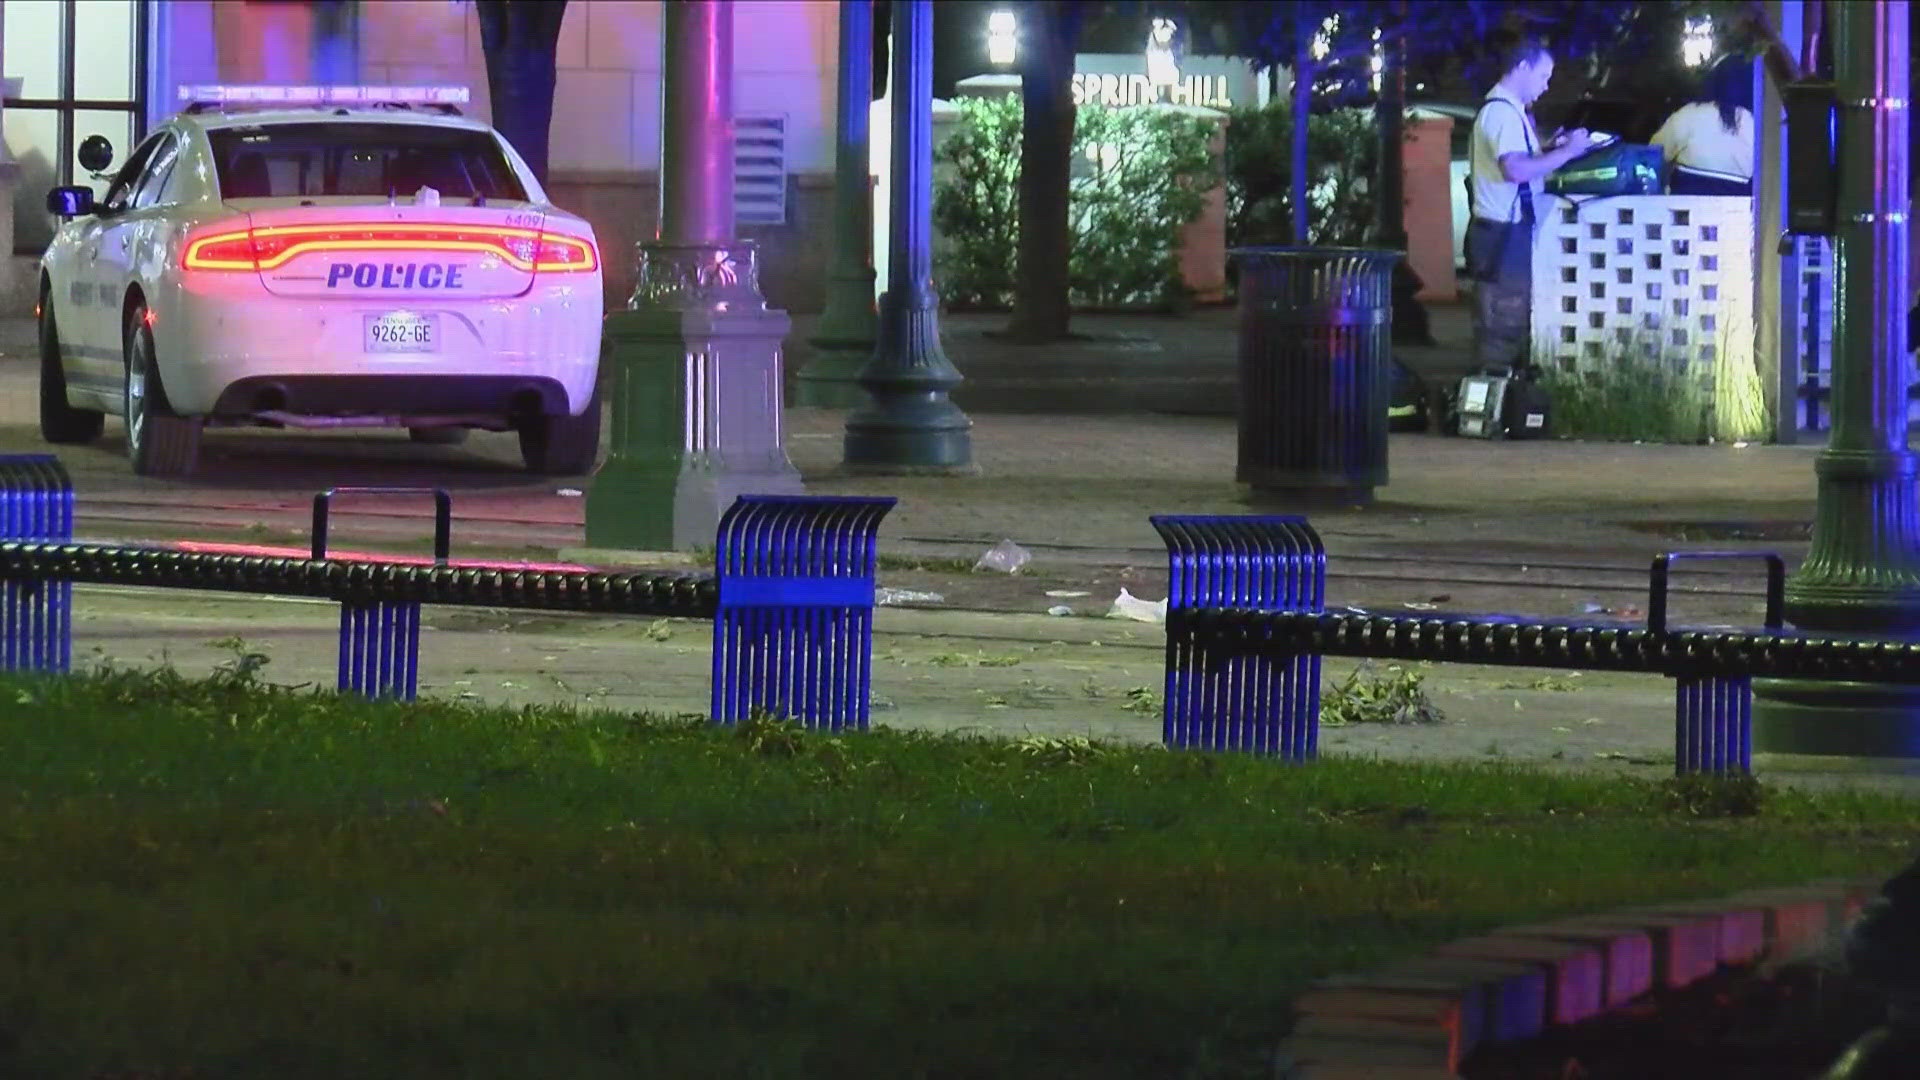 The Memphis Police Department responded to the shooting call Friday, May 31, just before 3 a.m. at Main Street and Court Avenue.